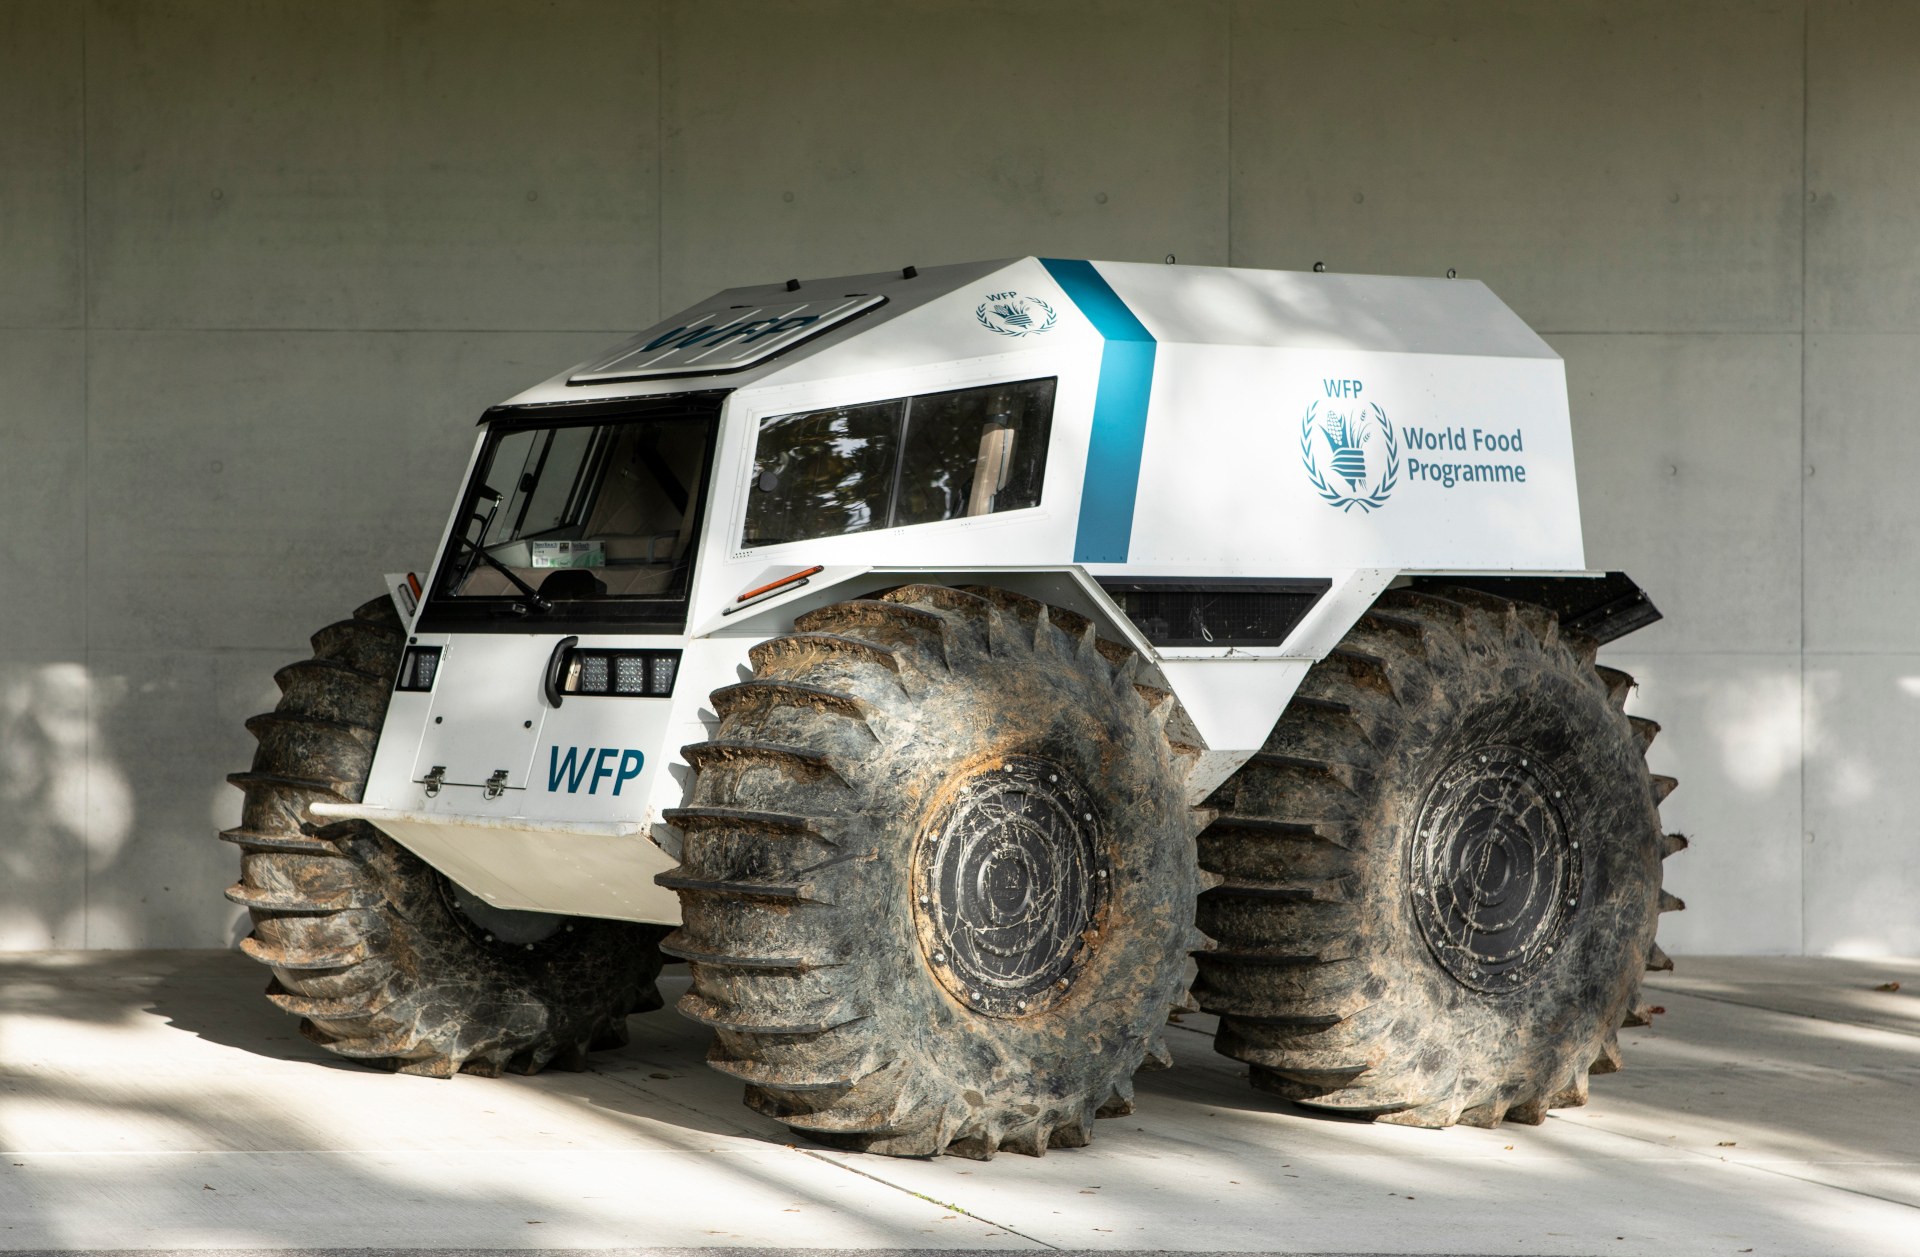 The AHEAD (Autonomous Humanitarian Emergency Aid Devices) project